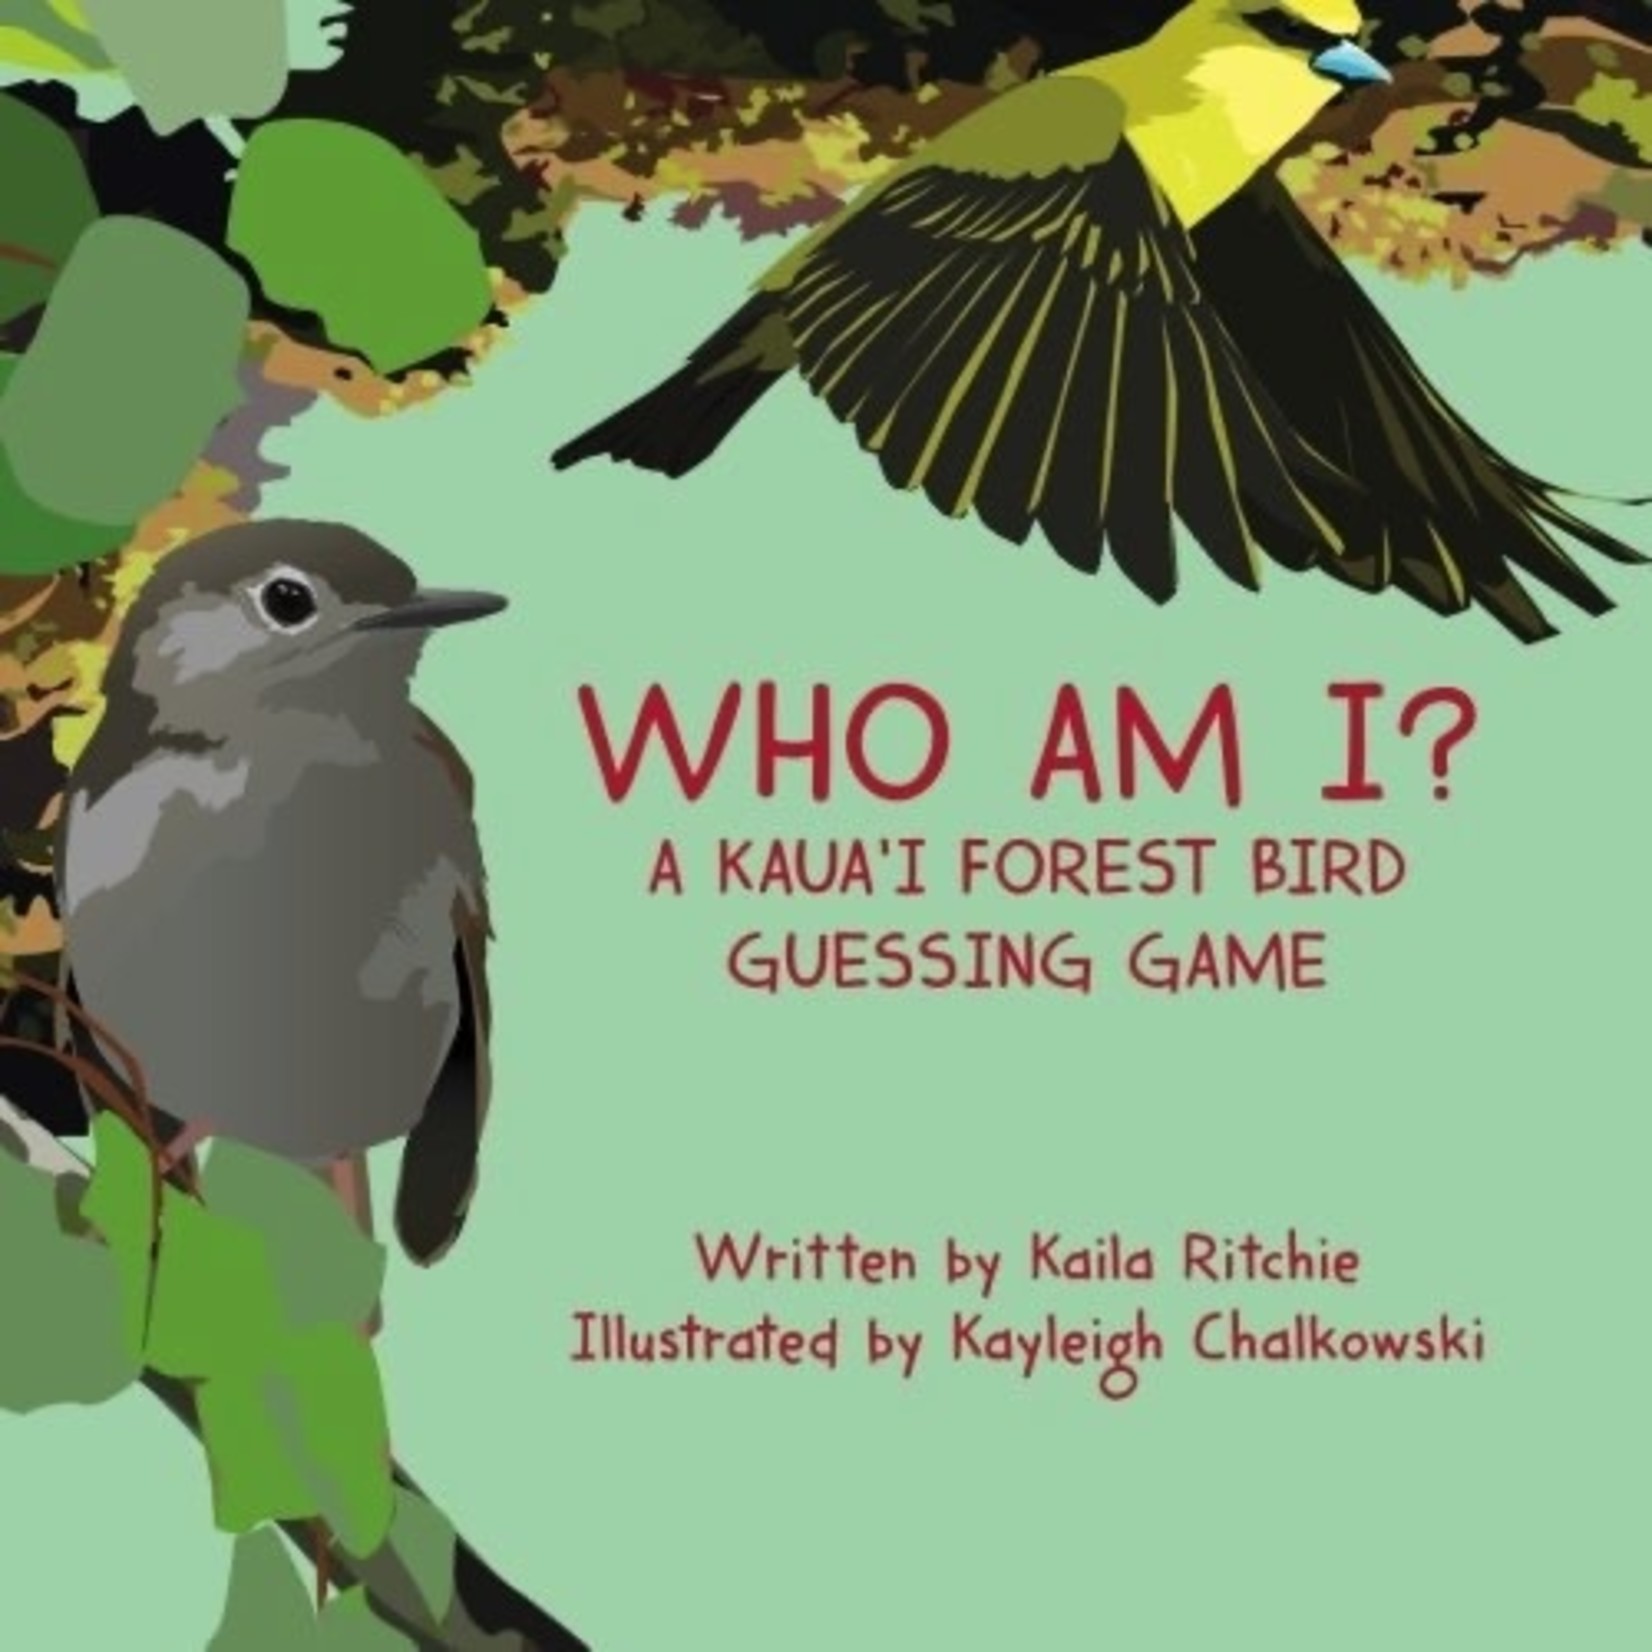 Kaua'i Forest Bird Recovery Project Childrens Book - Who Am I? A Kaua’I Forest Bird Guessing Game